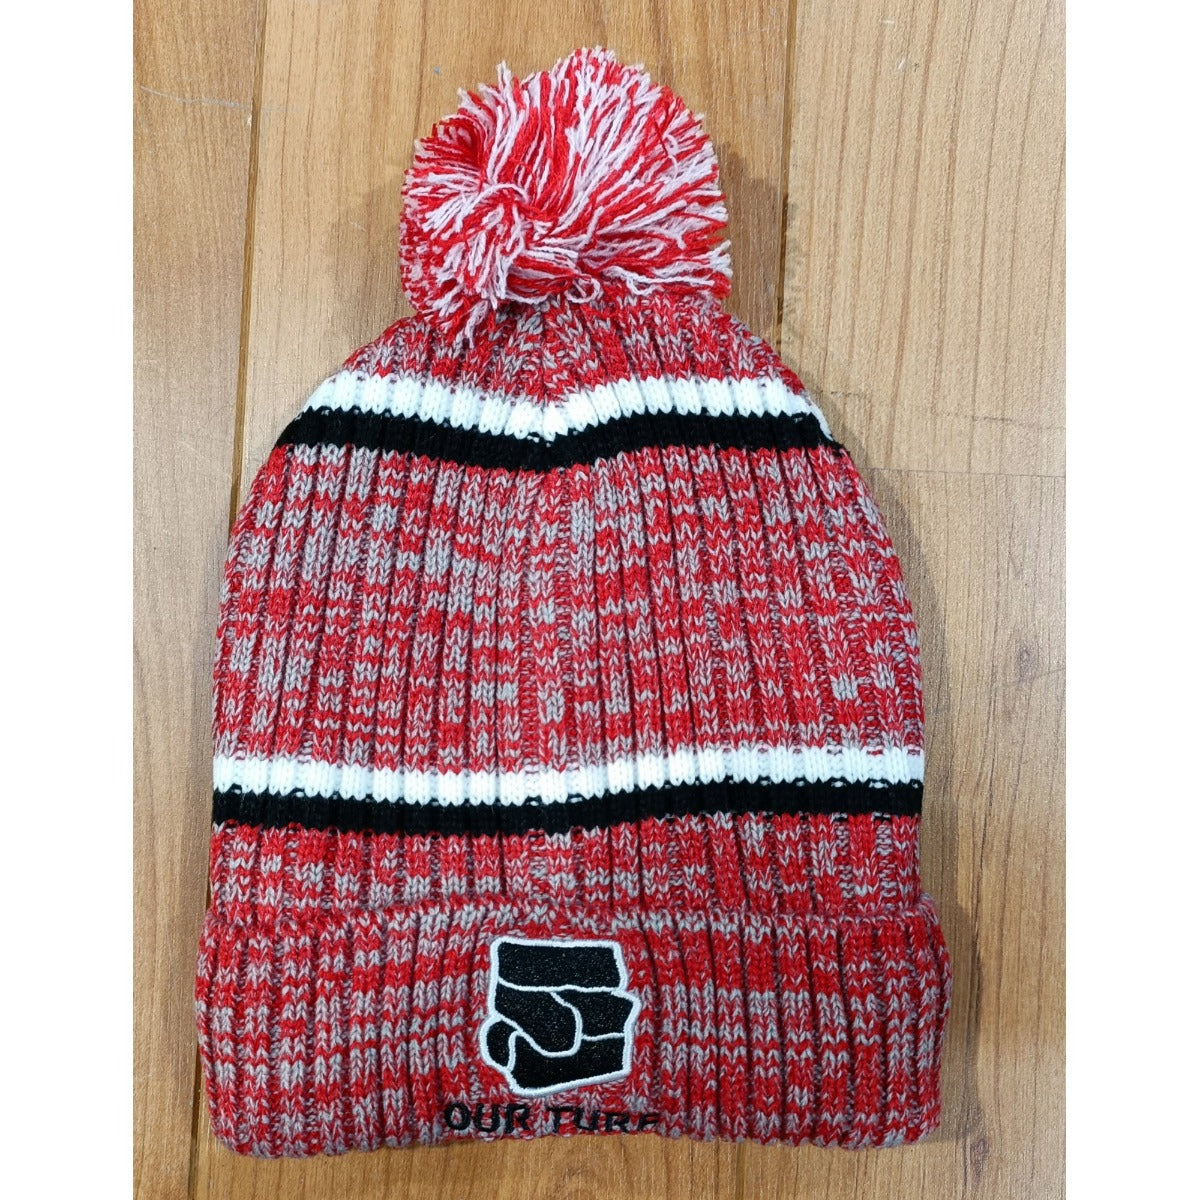 Our Turf Bobble Hat